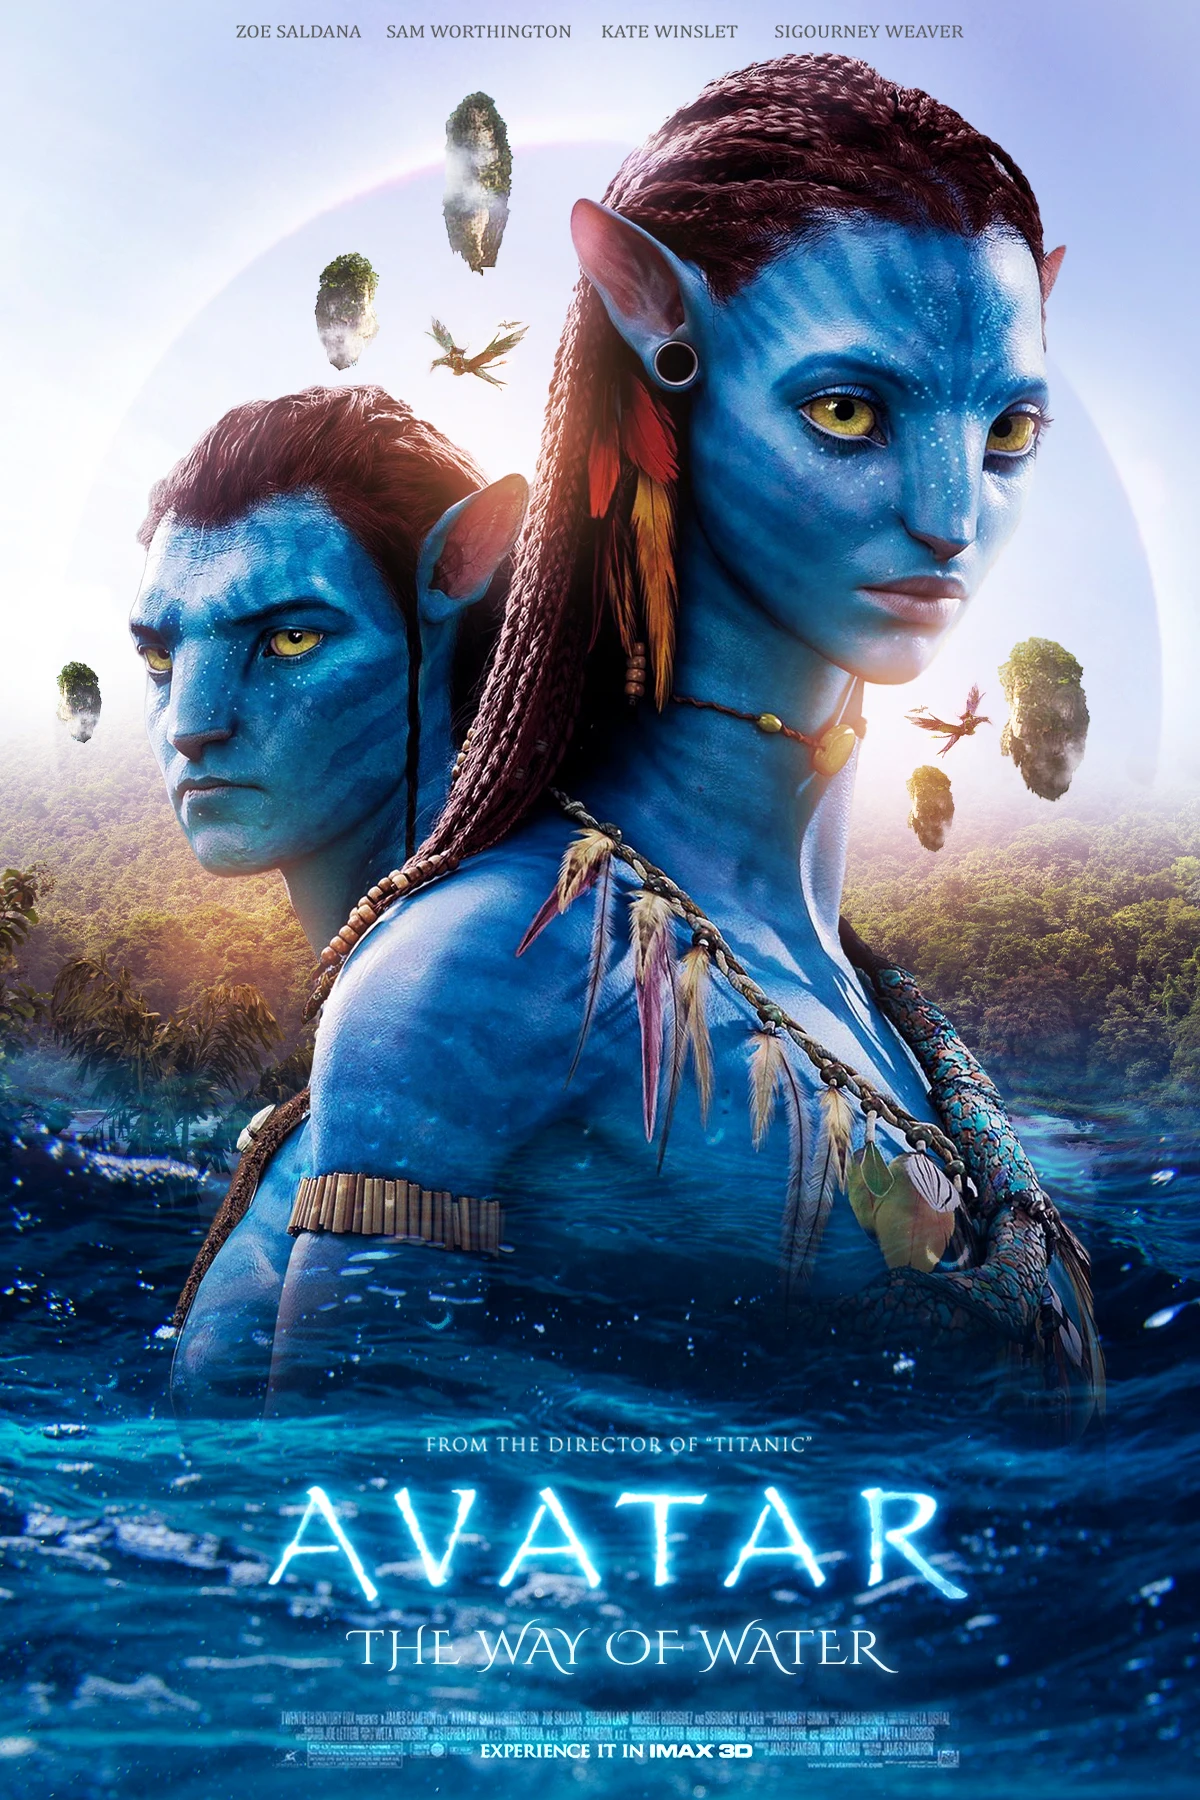 Avatar The Way of Water gets a batch of character posters